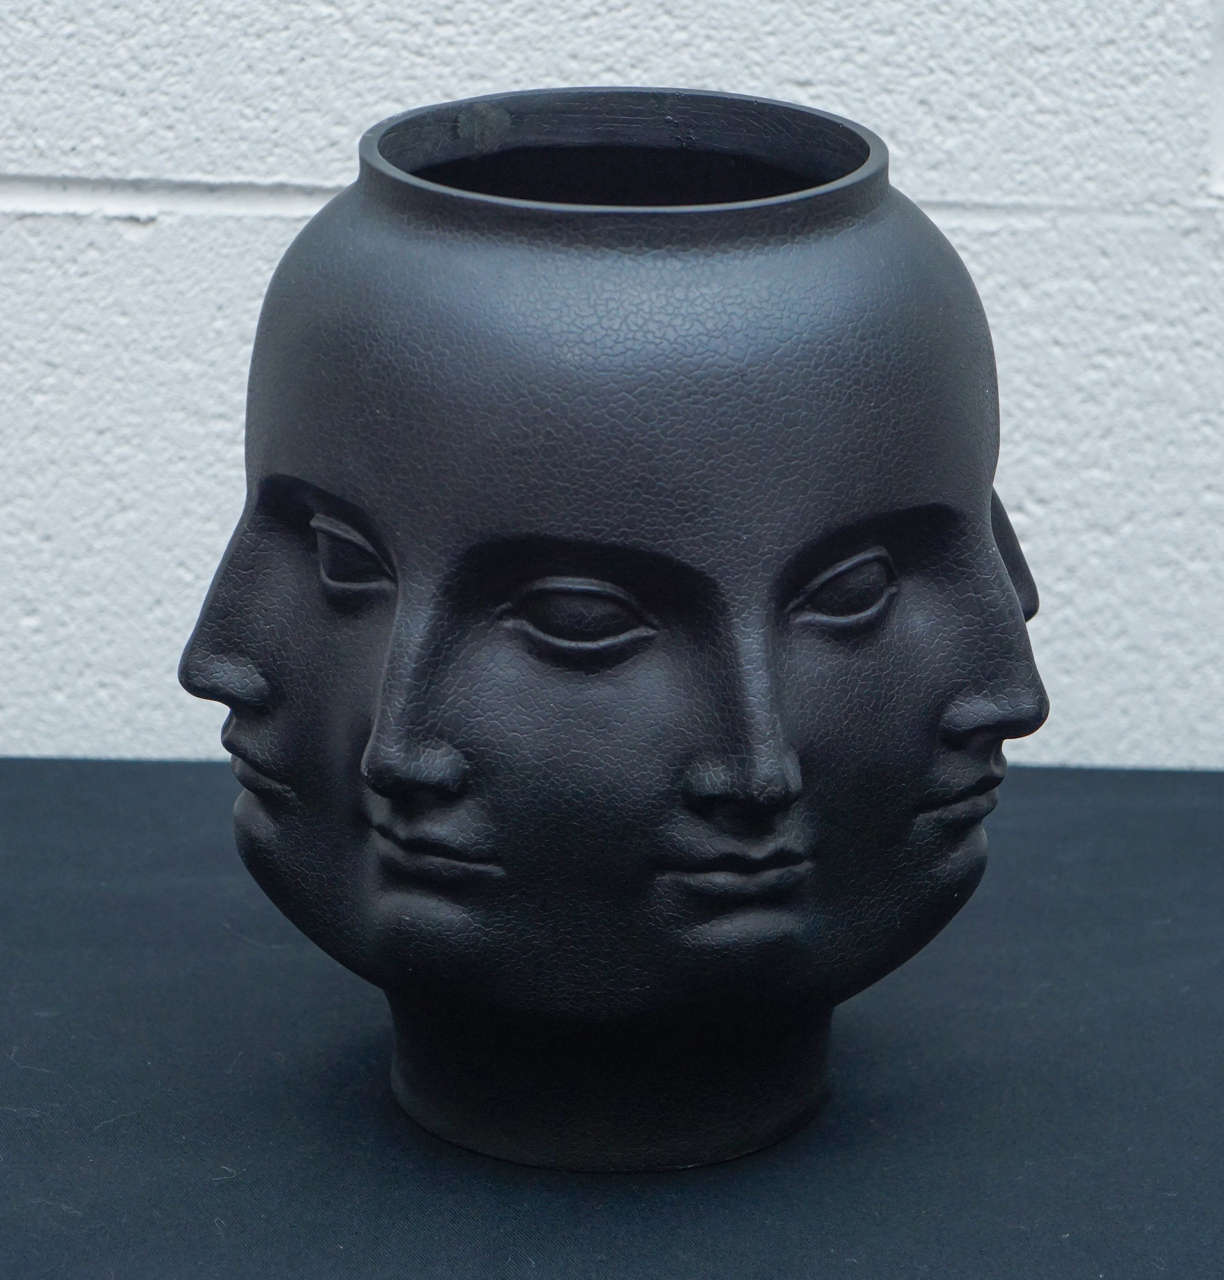 Here is a beautiful Dora Maar vase made of resin in a black crackled finish.
The vase was produced by TMS in 2005.